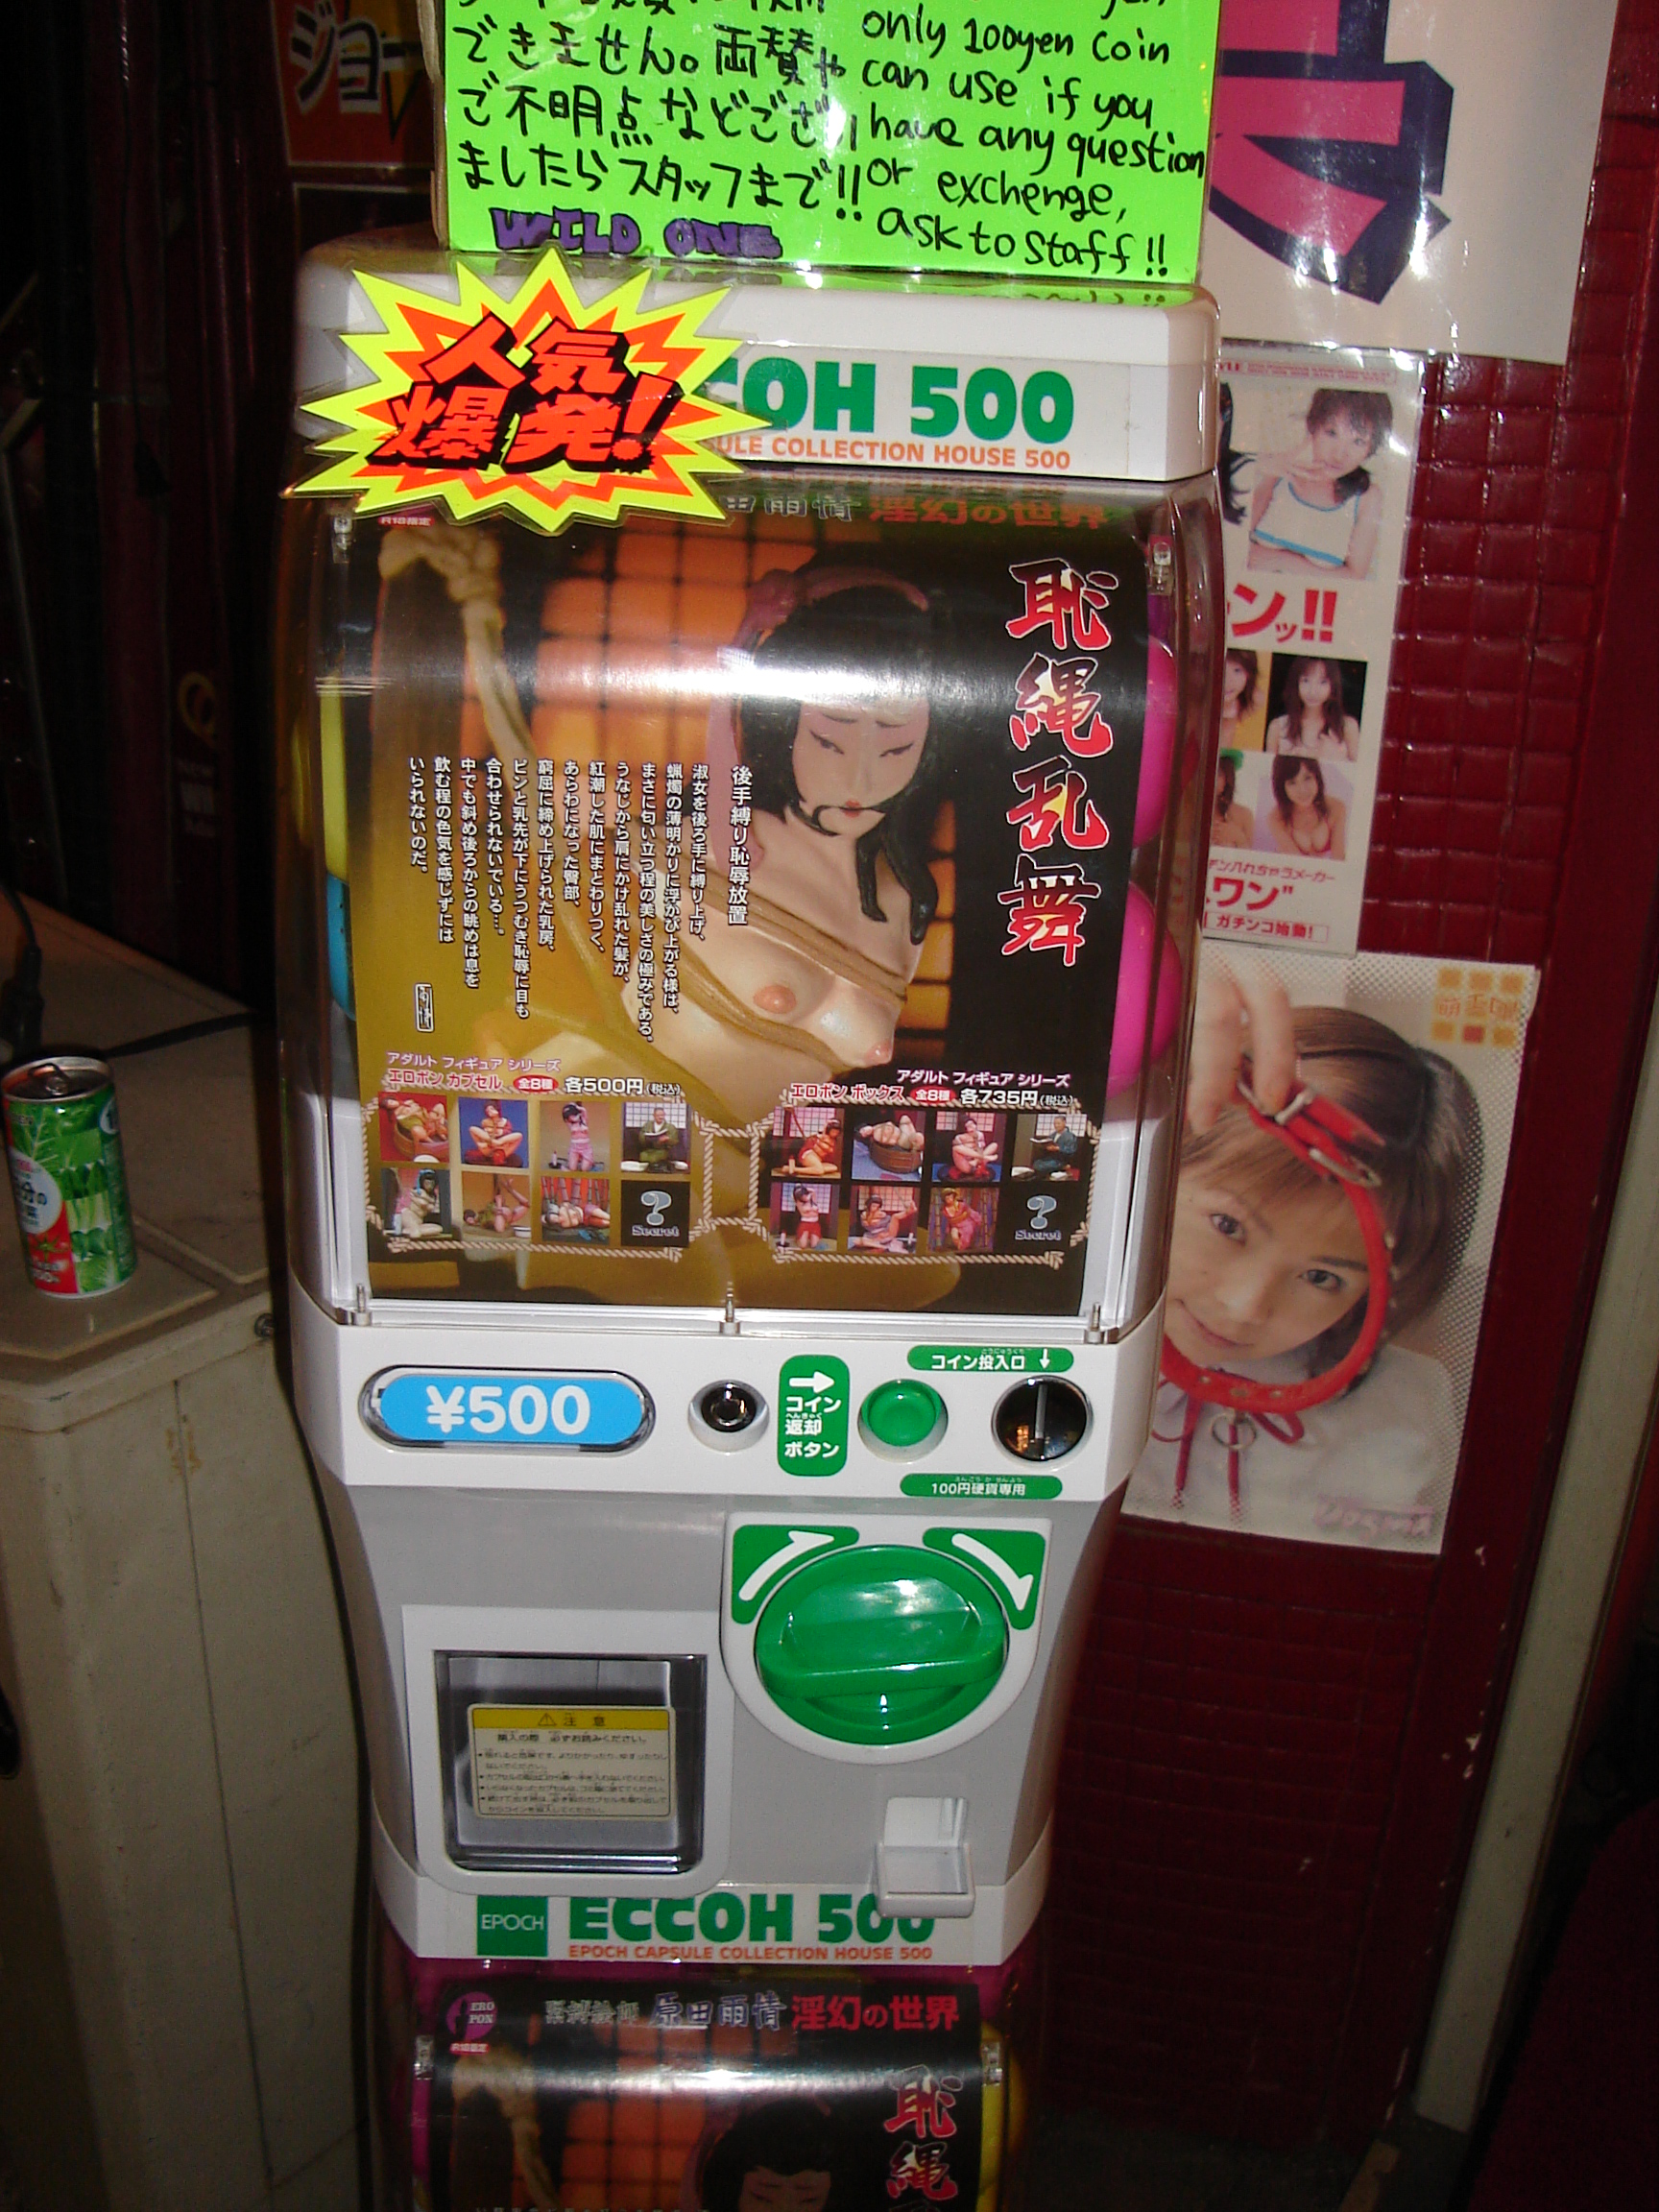 a gachapon machine shows a photo of a japanese woman in bondage